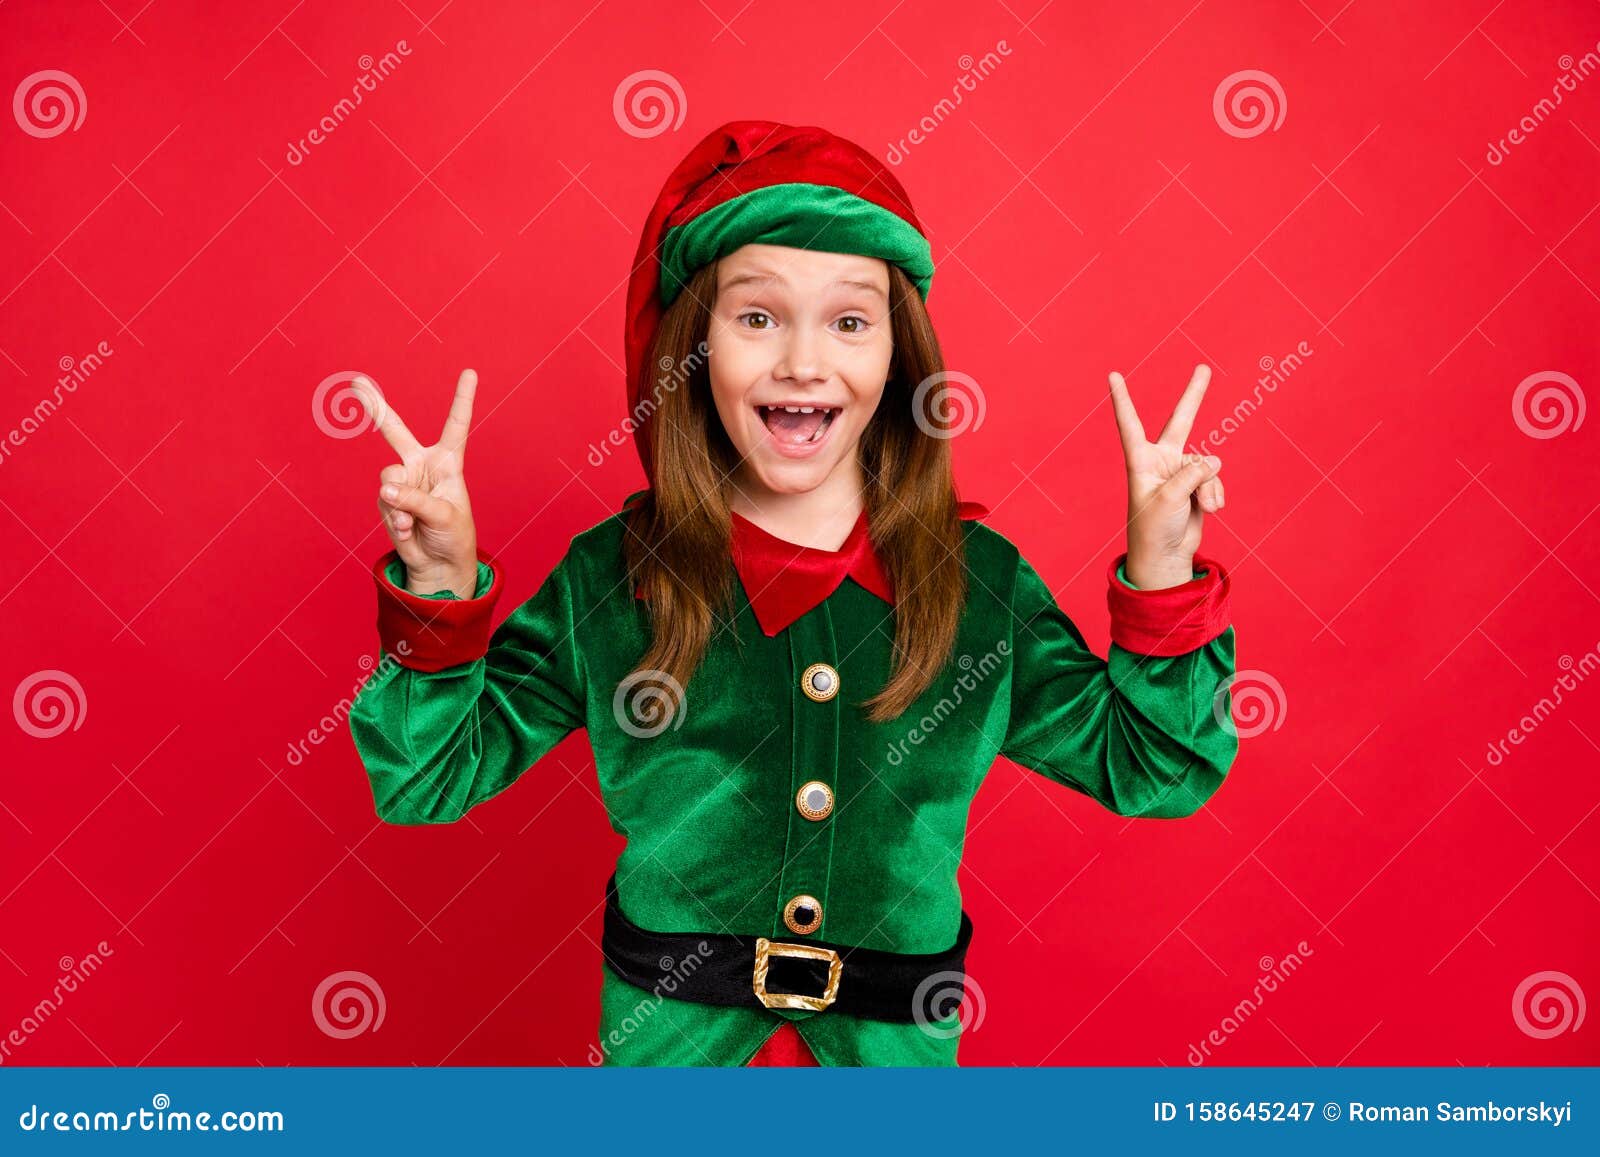 Portrait Of Crazy Elf Kid In Green Hat With Long Red Head